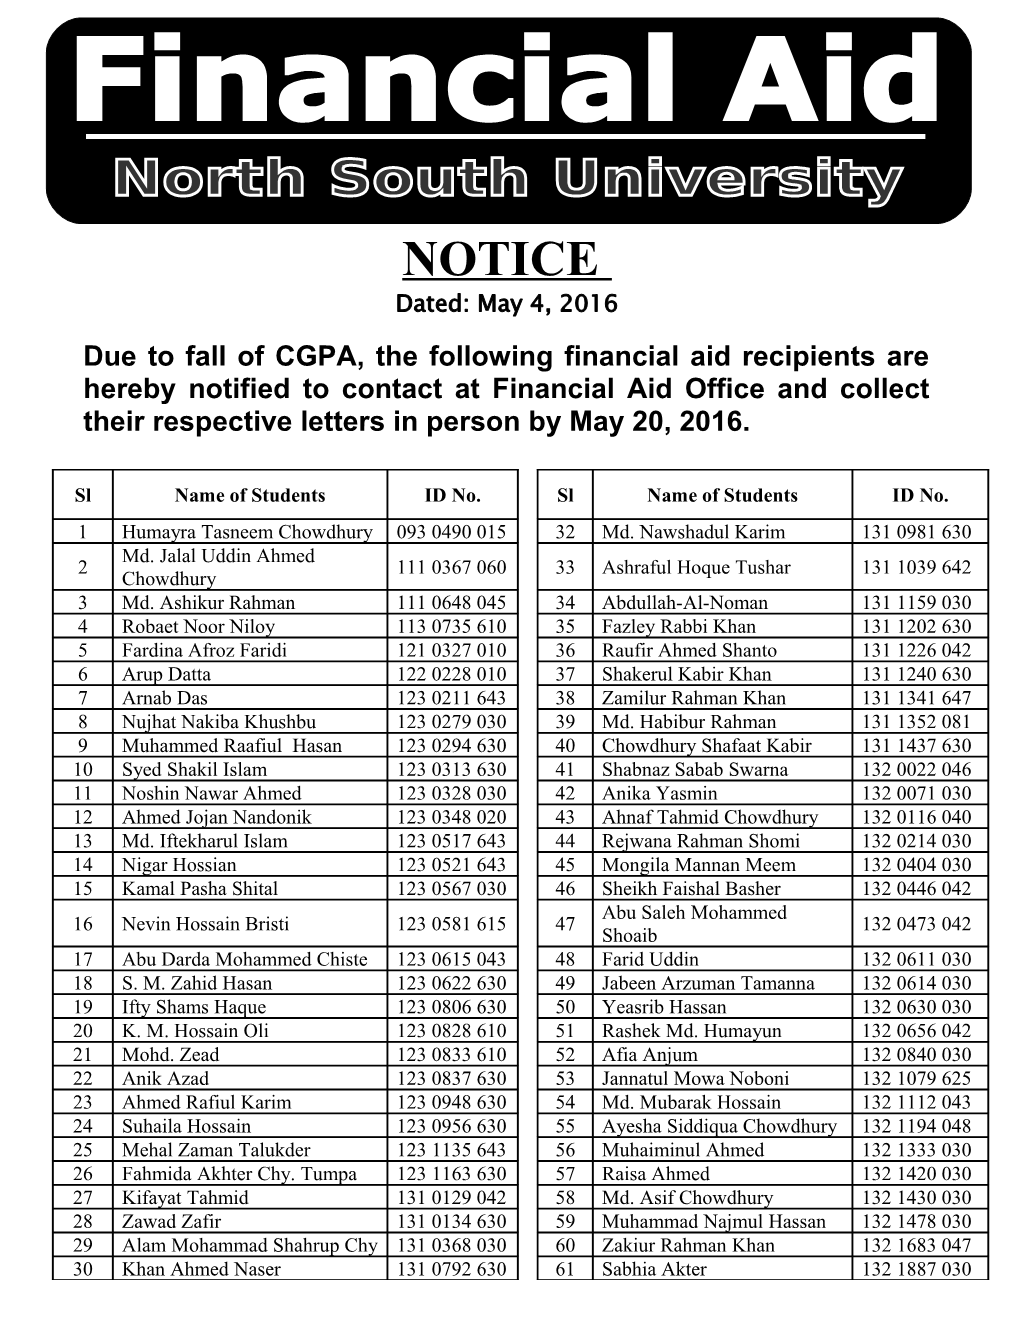 Due to Fall of CGPA, the Following Financial Aid Recipients Are Hereby Notified to Contact